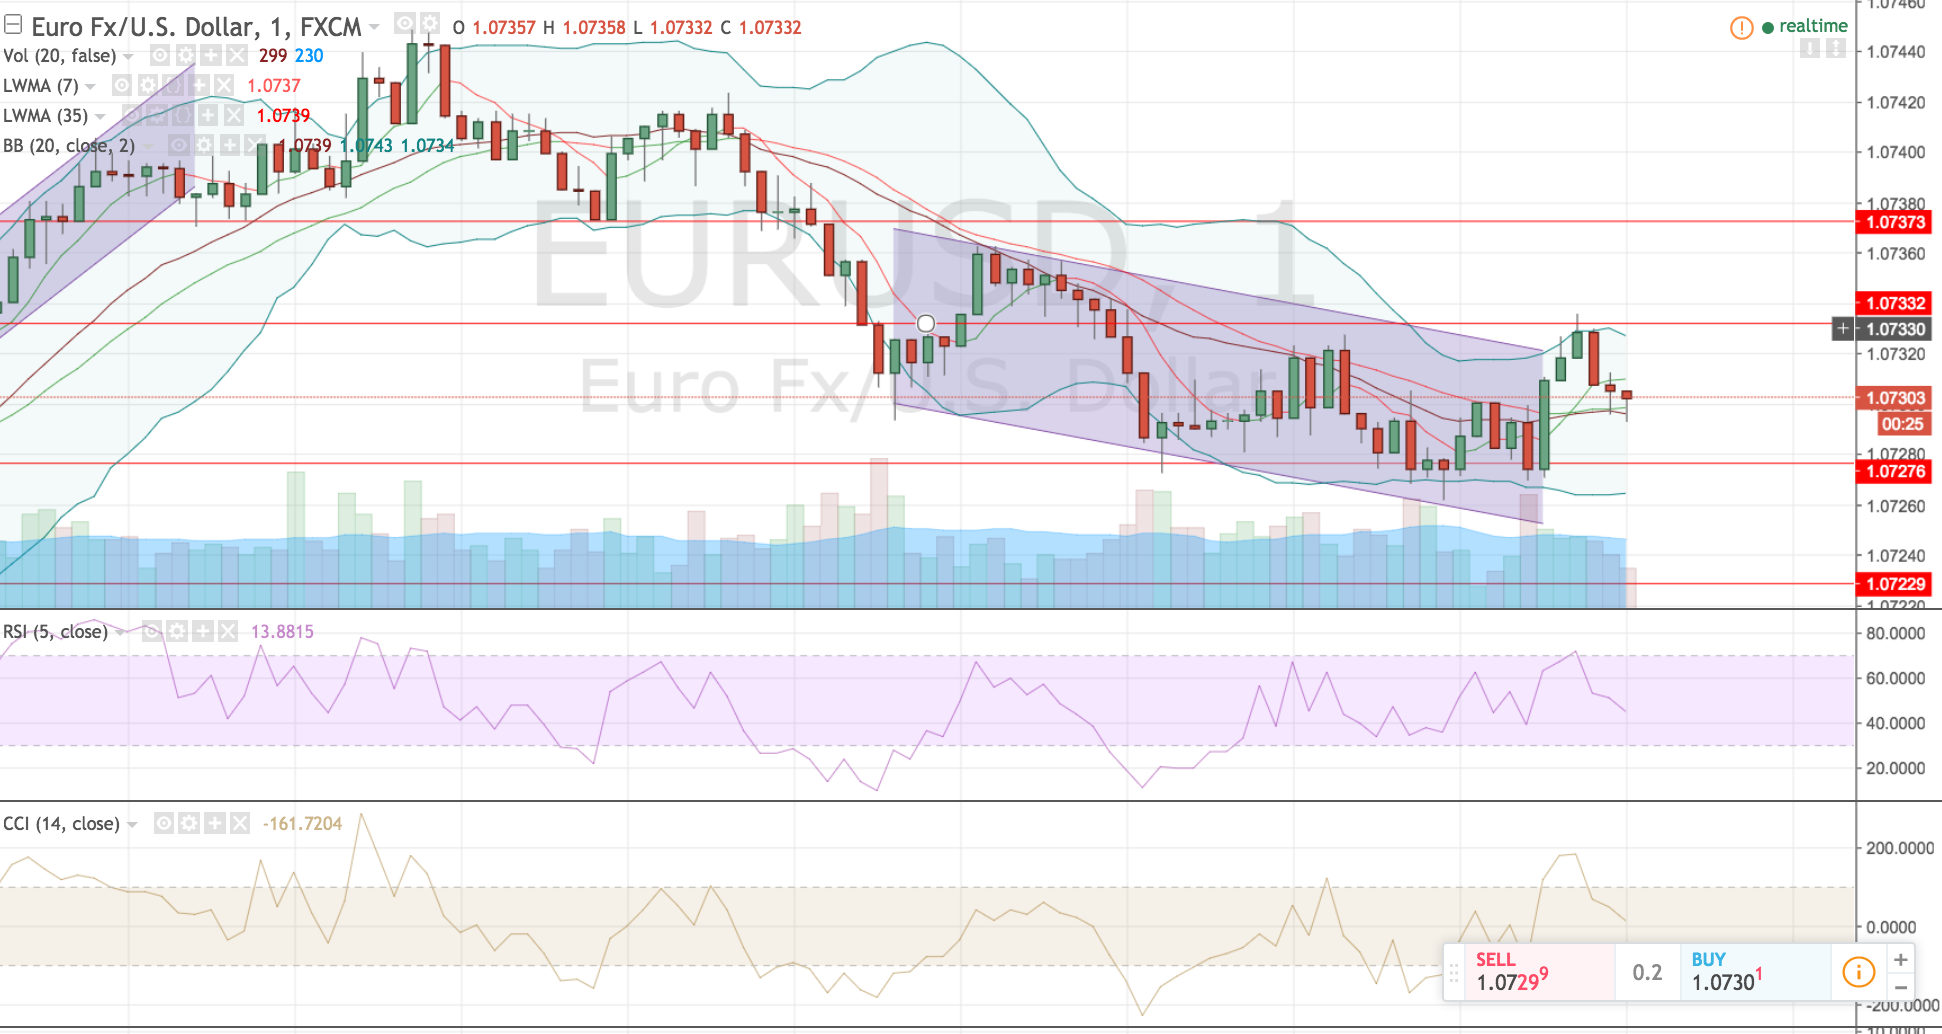 EURUSD Parallel Price Channel